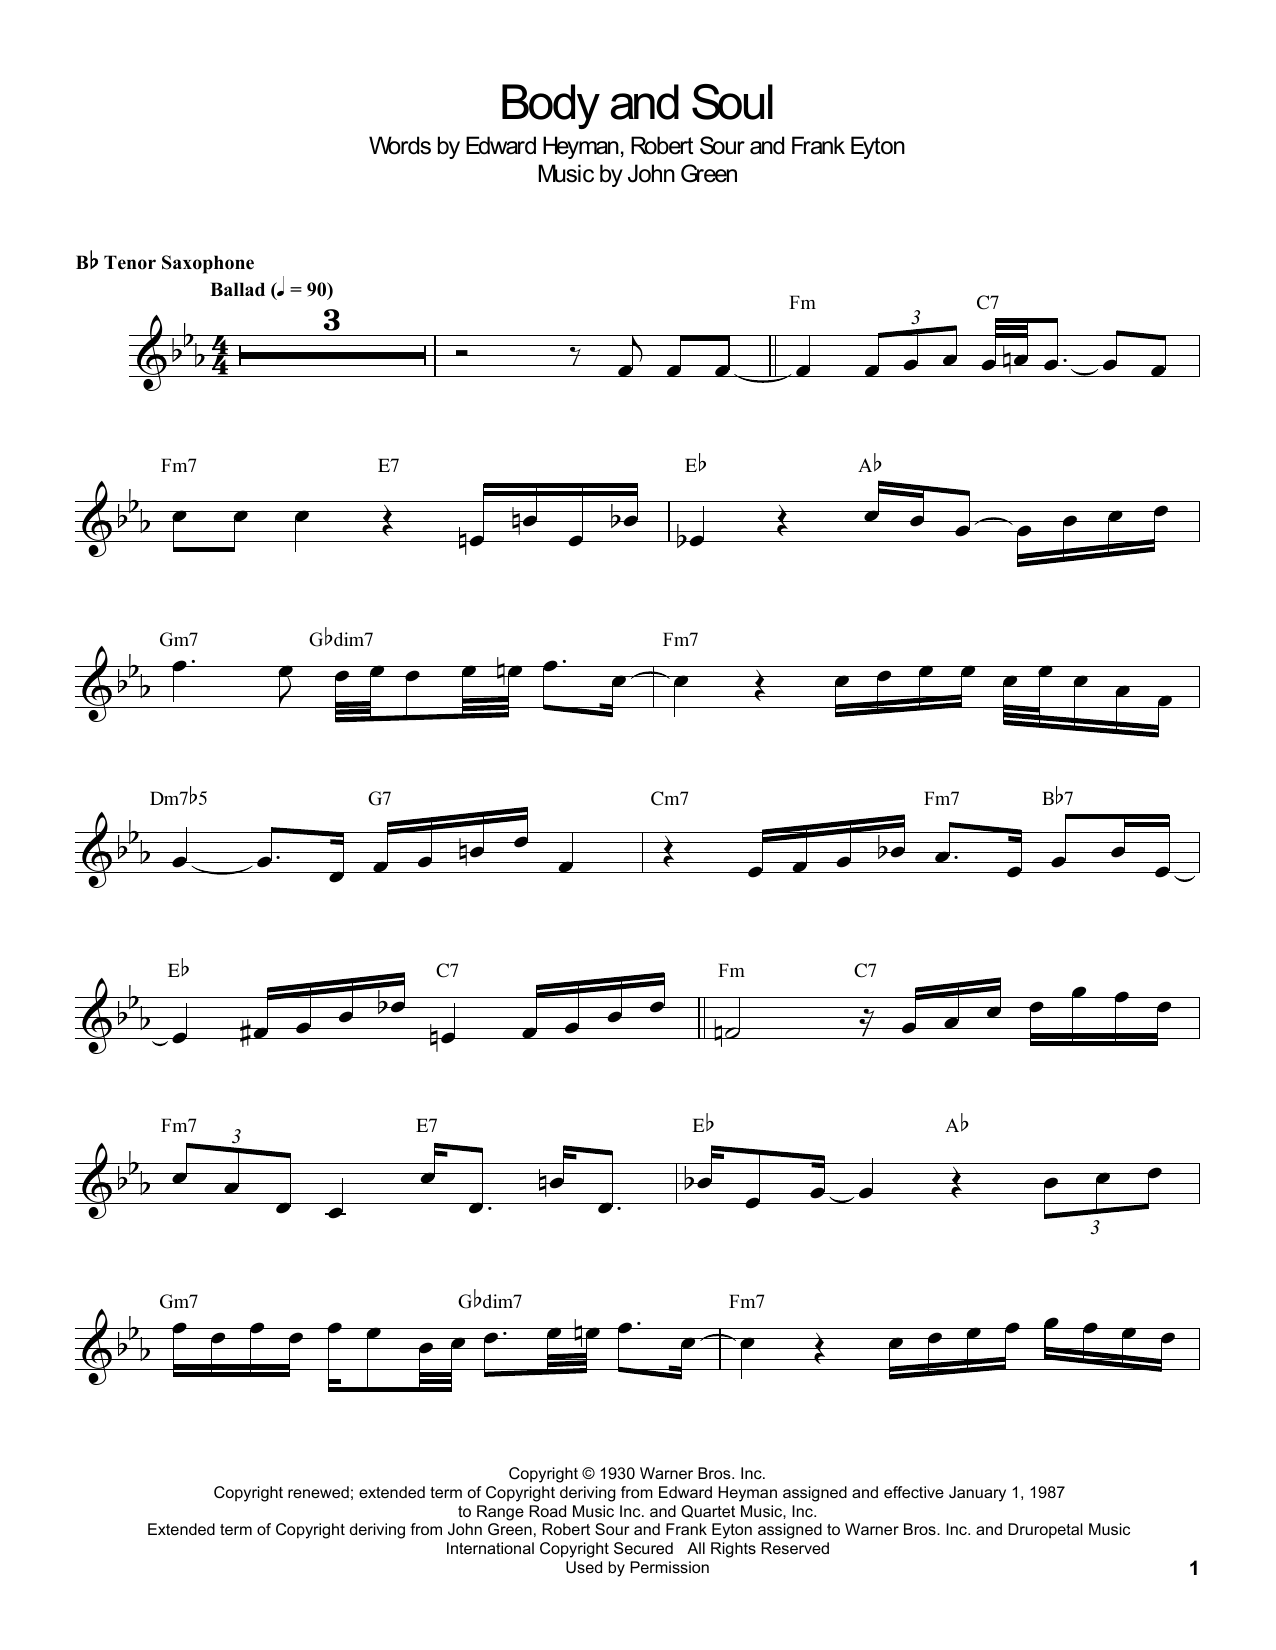 Coleman Hawkins "Body And Soul" Sheet Music PDF Notes, Chords Jazz